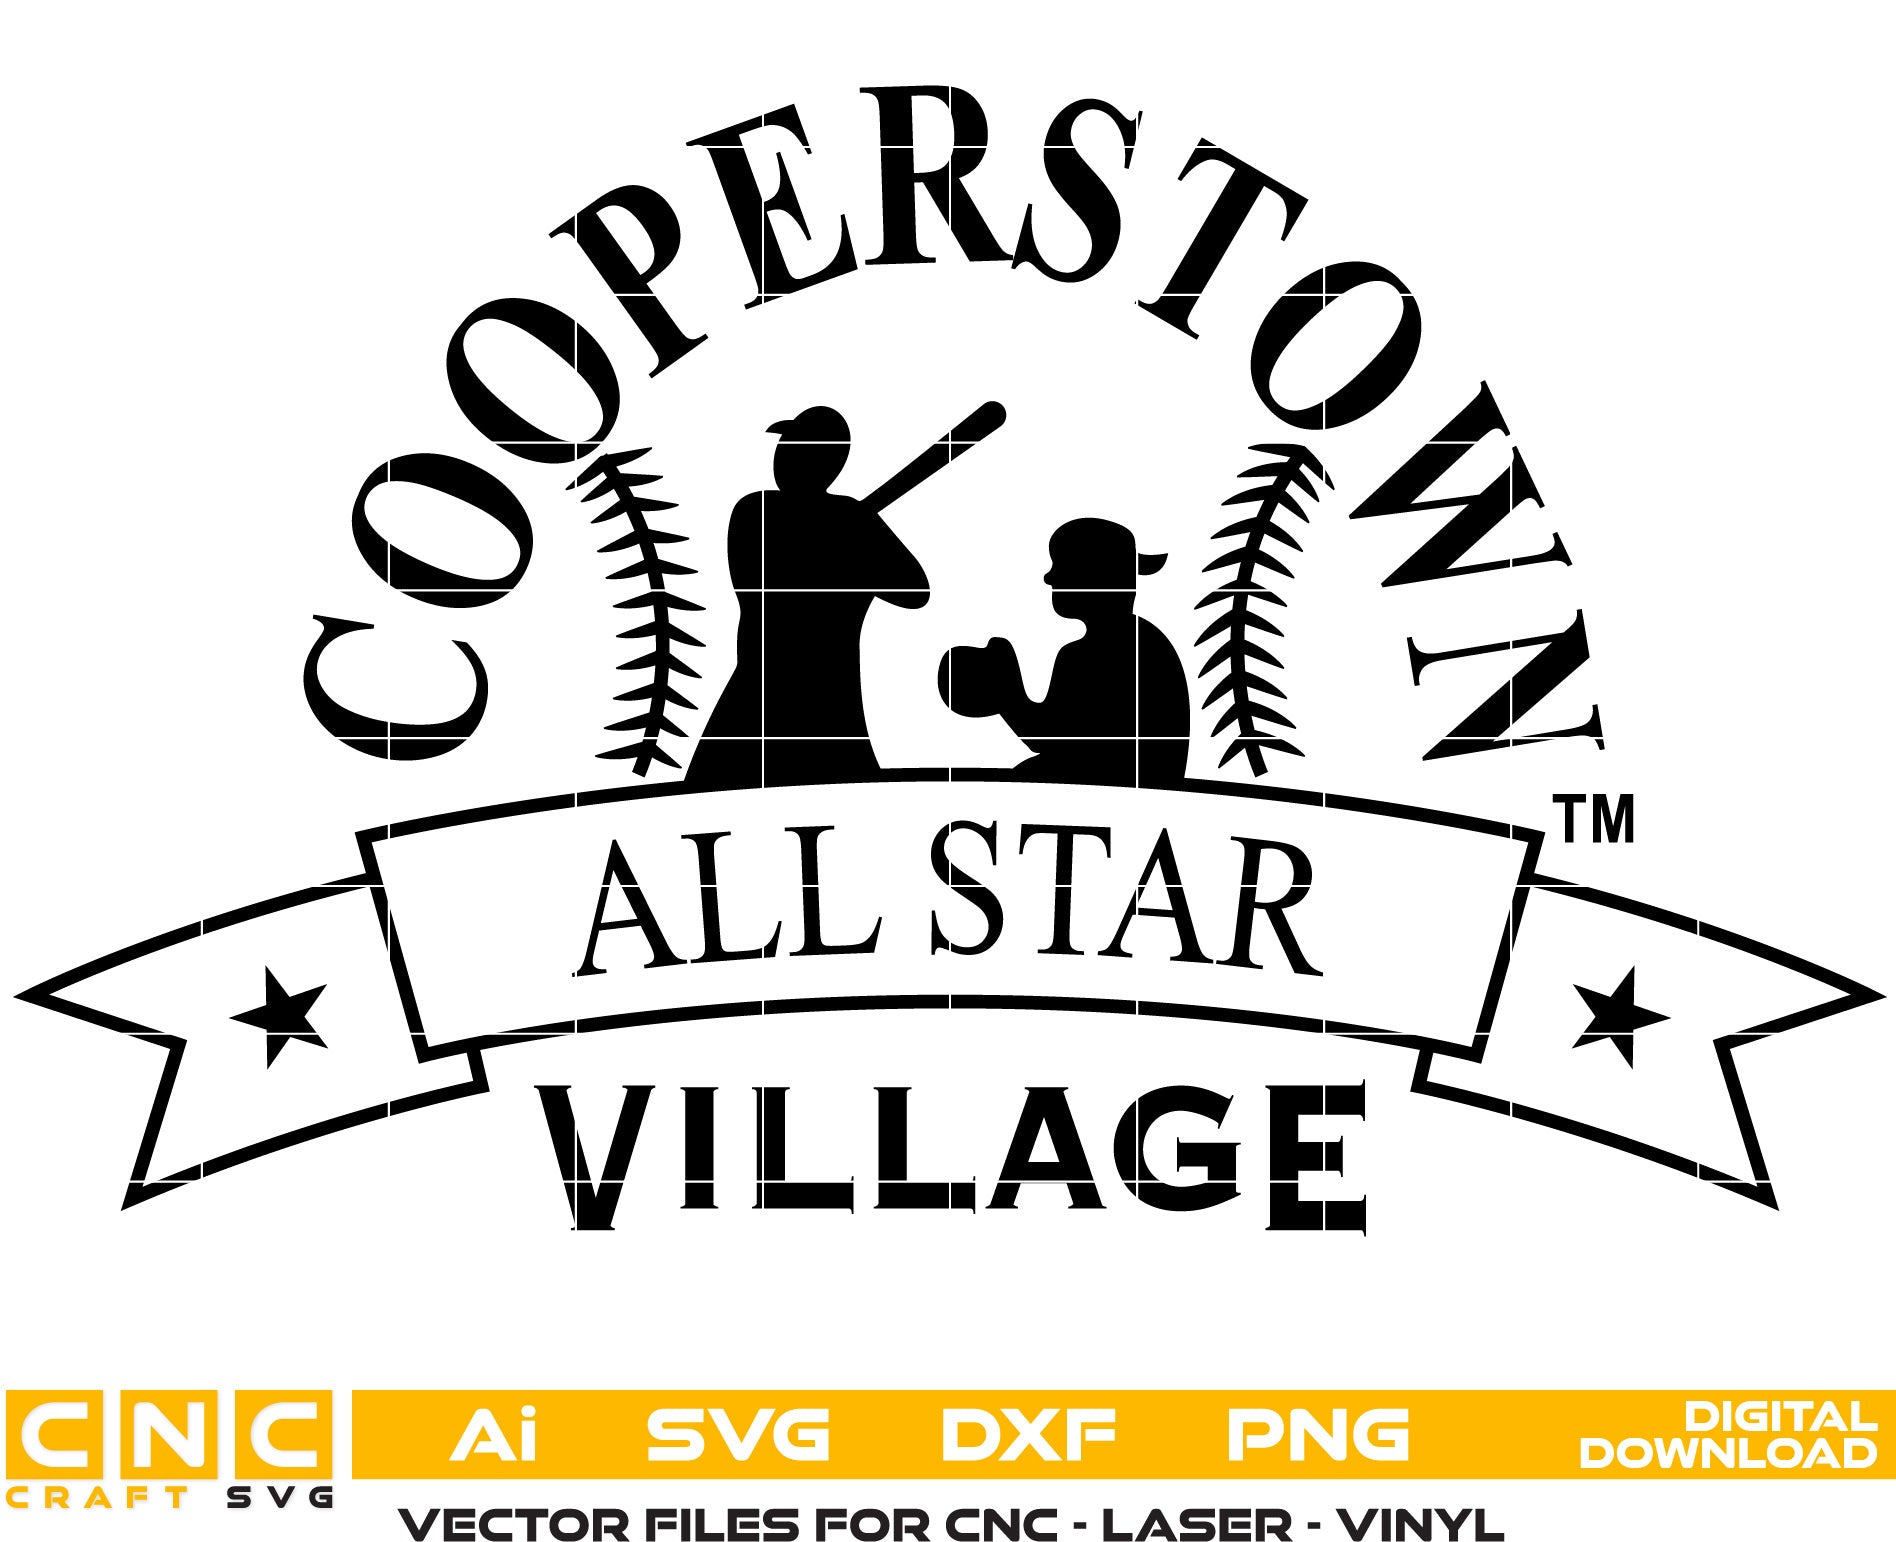 Cooperstown Village Seal Vector Art, Ai,SVG, DXF, PNG, Digital Files for Laser Engraving, Woodworking & Printing